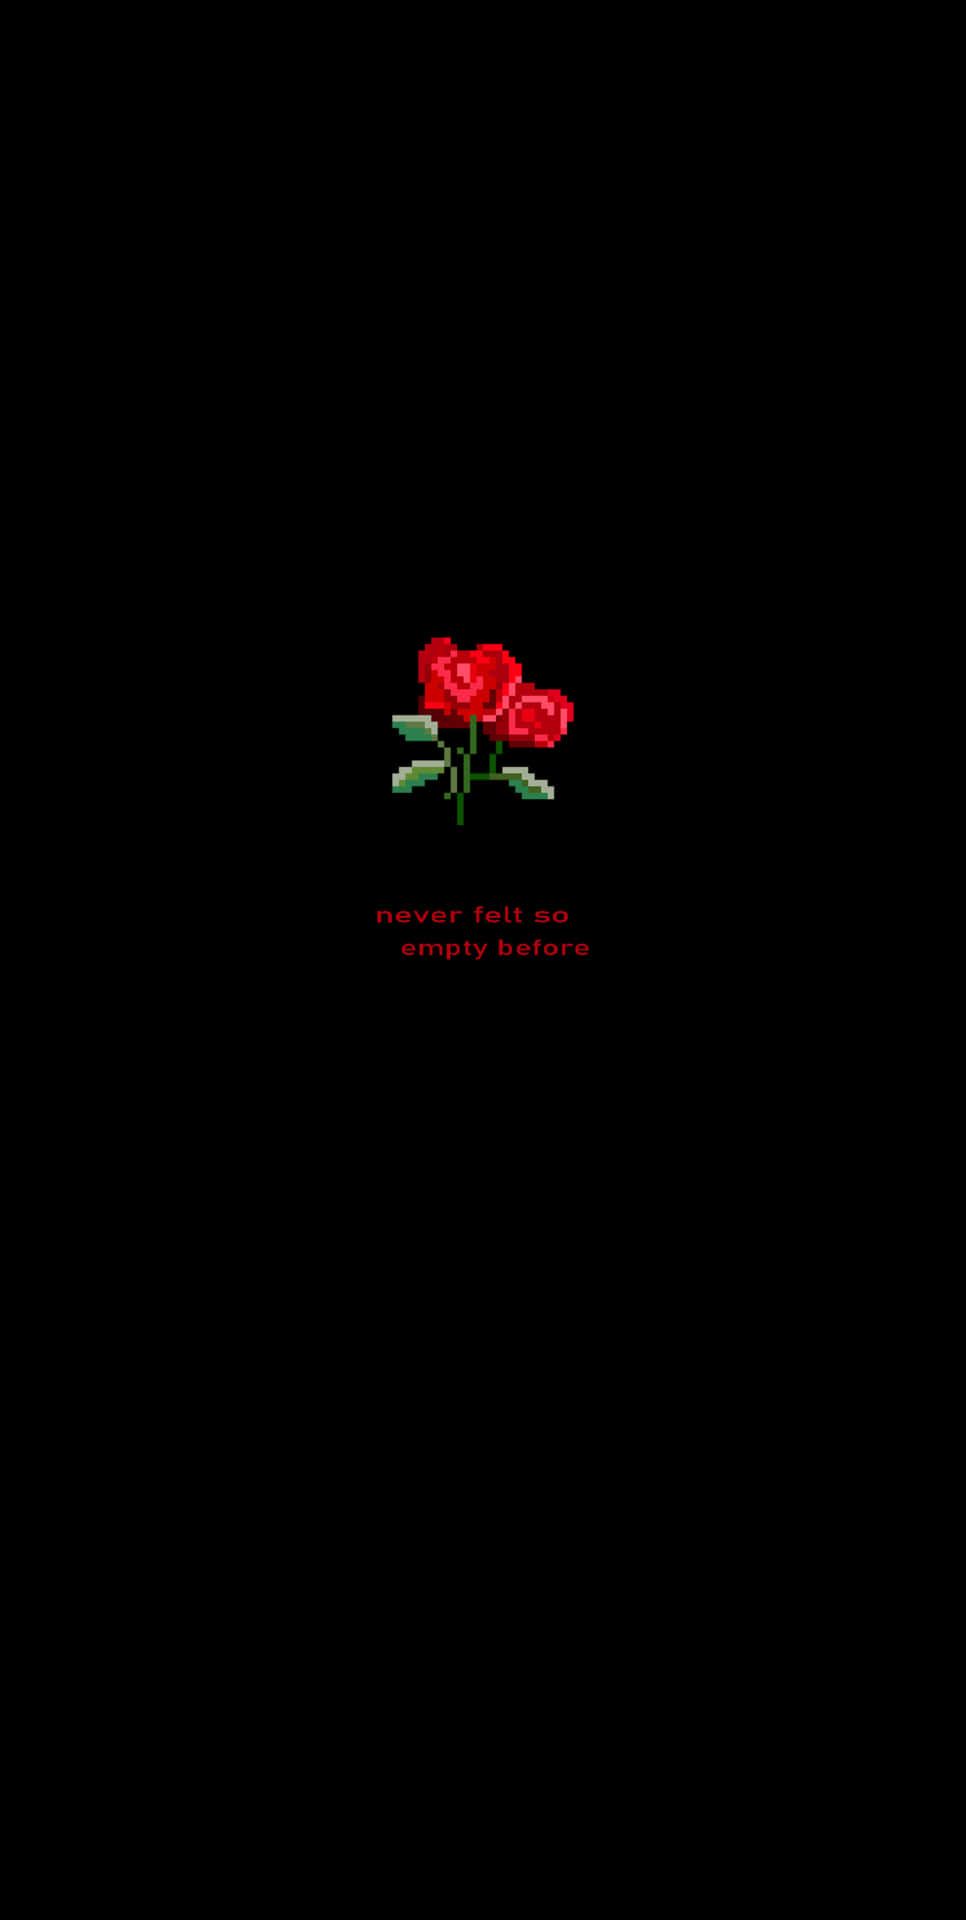 A black background with red roses on it - Dark red